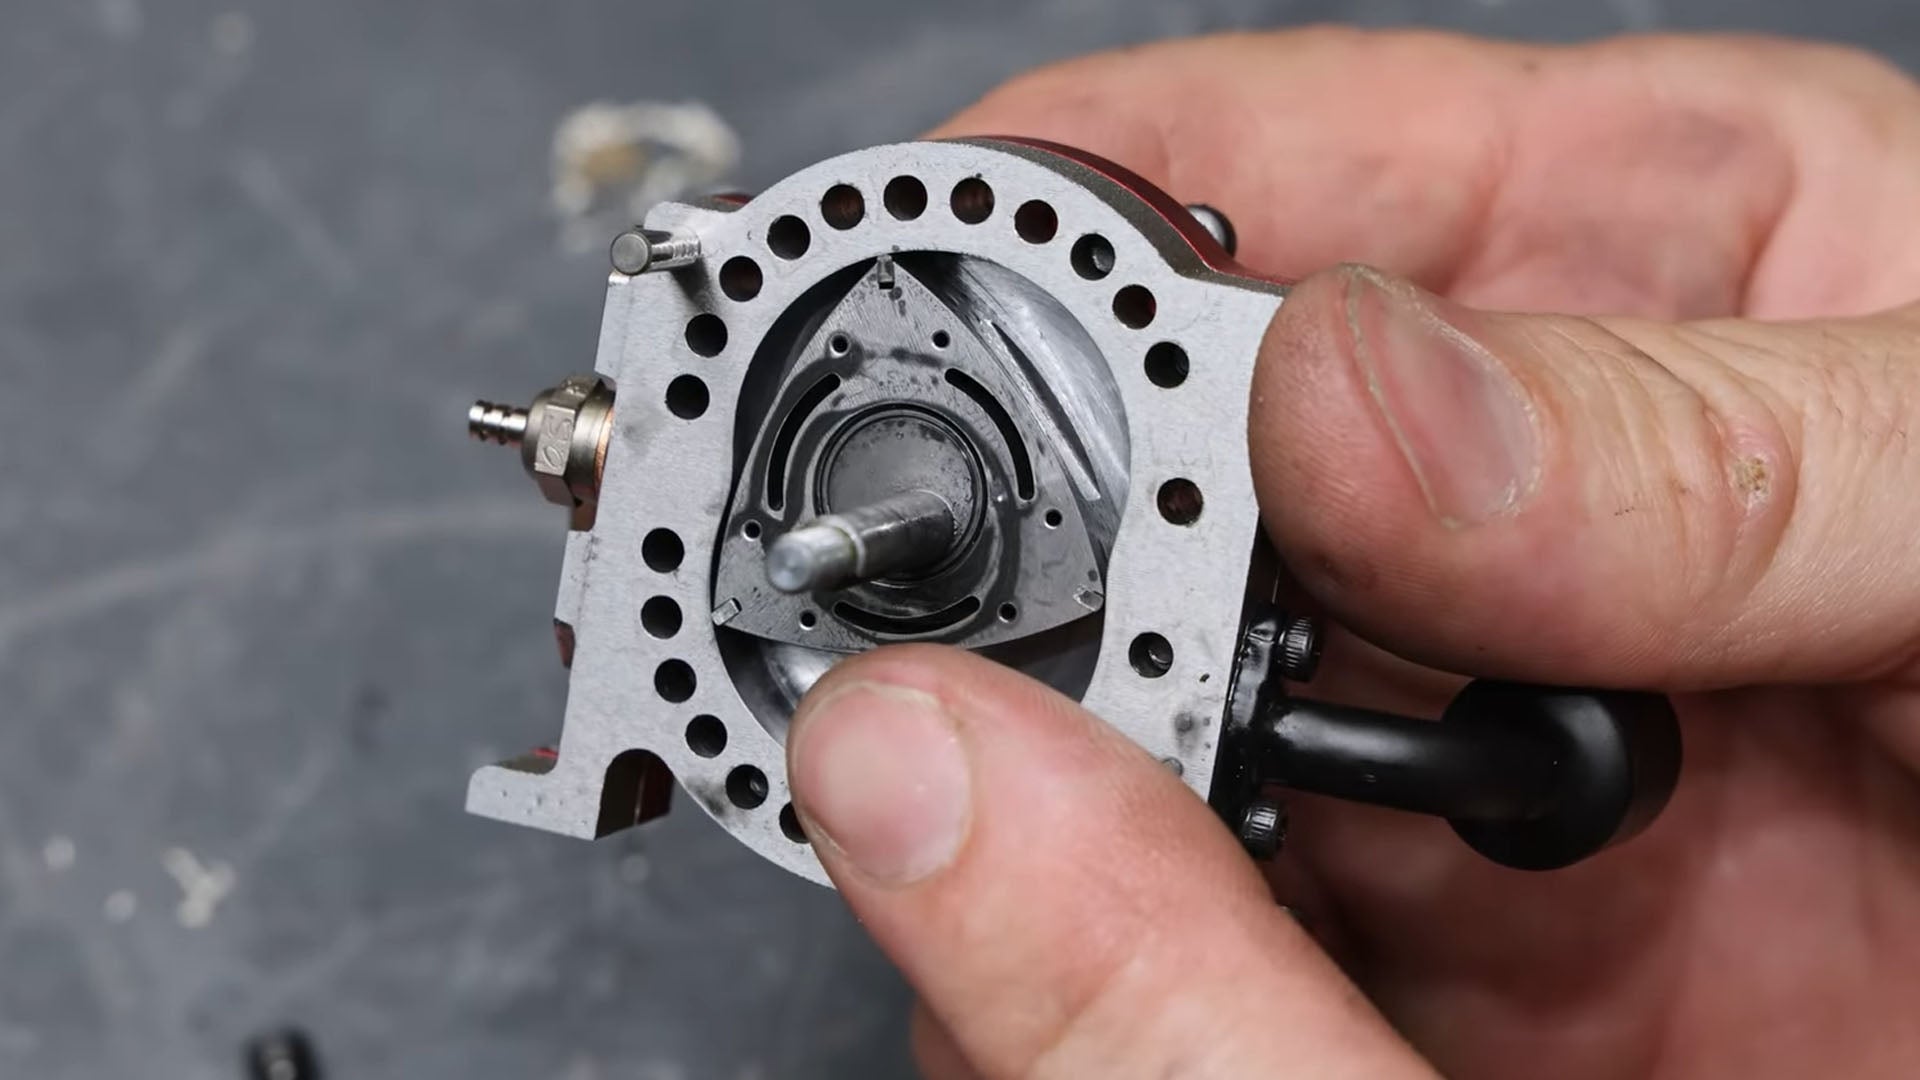 Rotary engines are already known for their high RPM; the smaller they get, the higher they tend to rev. So what happens when the world's smallest rota